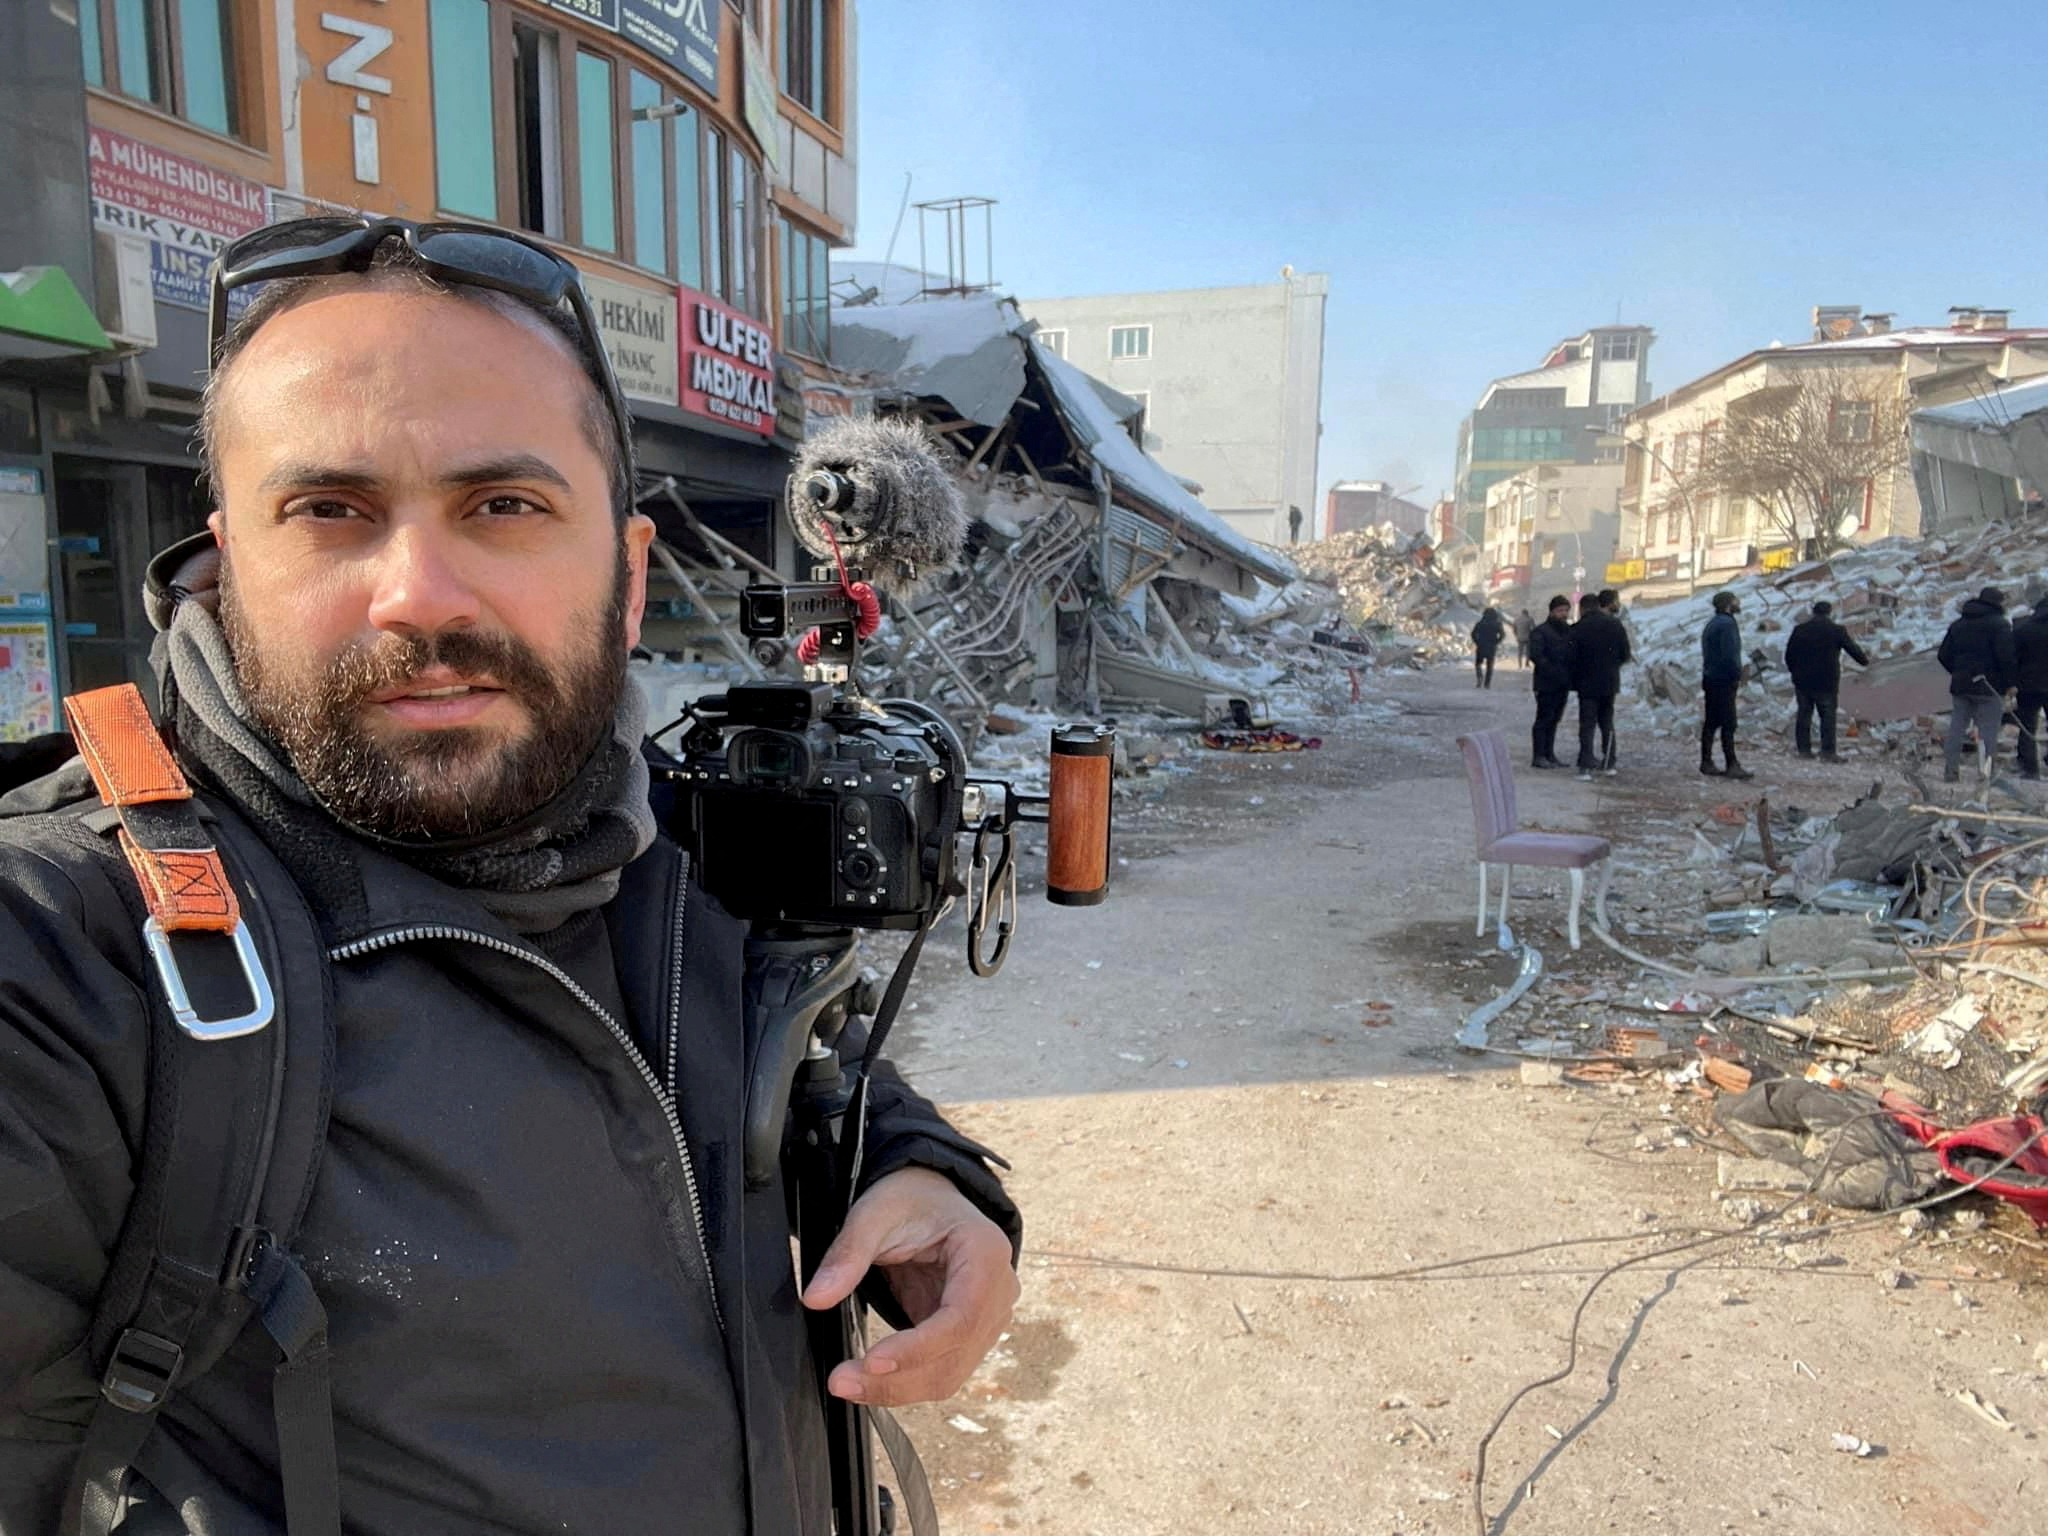 Reuters visuals journalist Issam Abdallah takes a selfie picture while working in Maras, Turkey